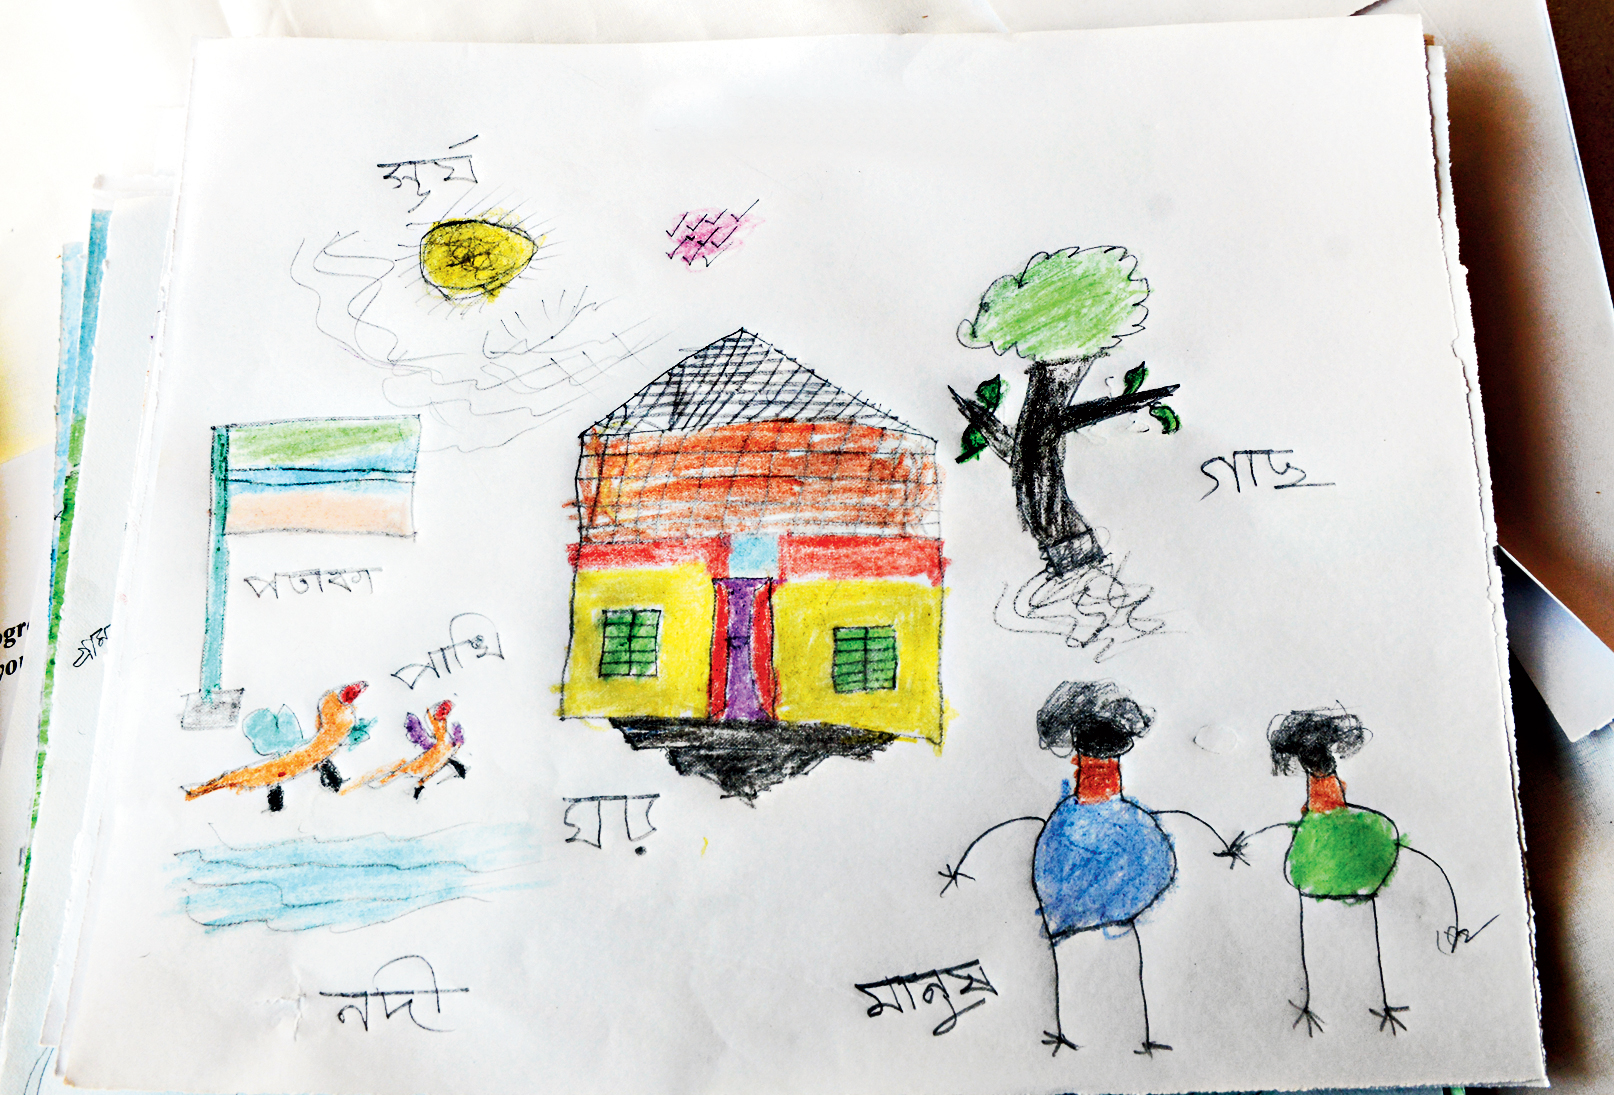 A painting submitted by a participant at the sit-and-draw competition held at Netaji Subhash Chandra Bose Cancer Hospital in Garia on Monday.